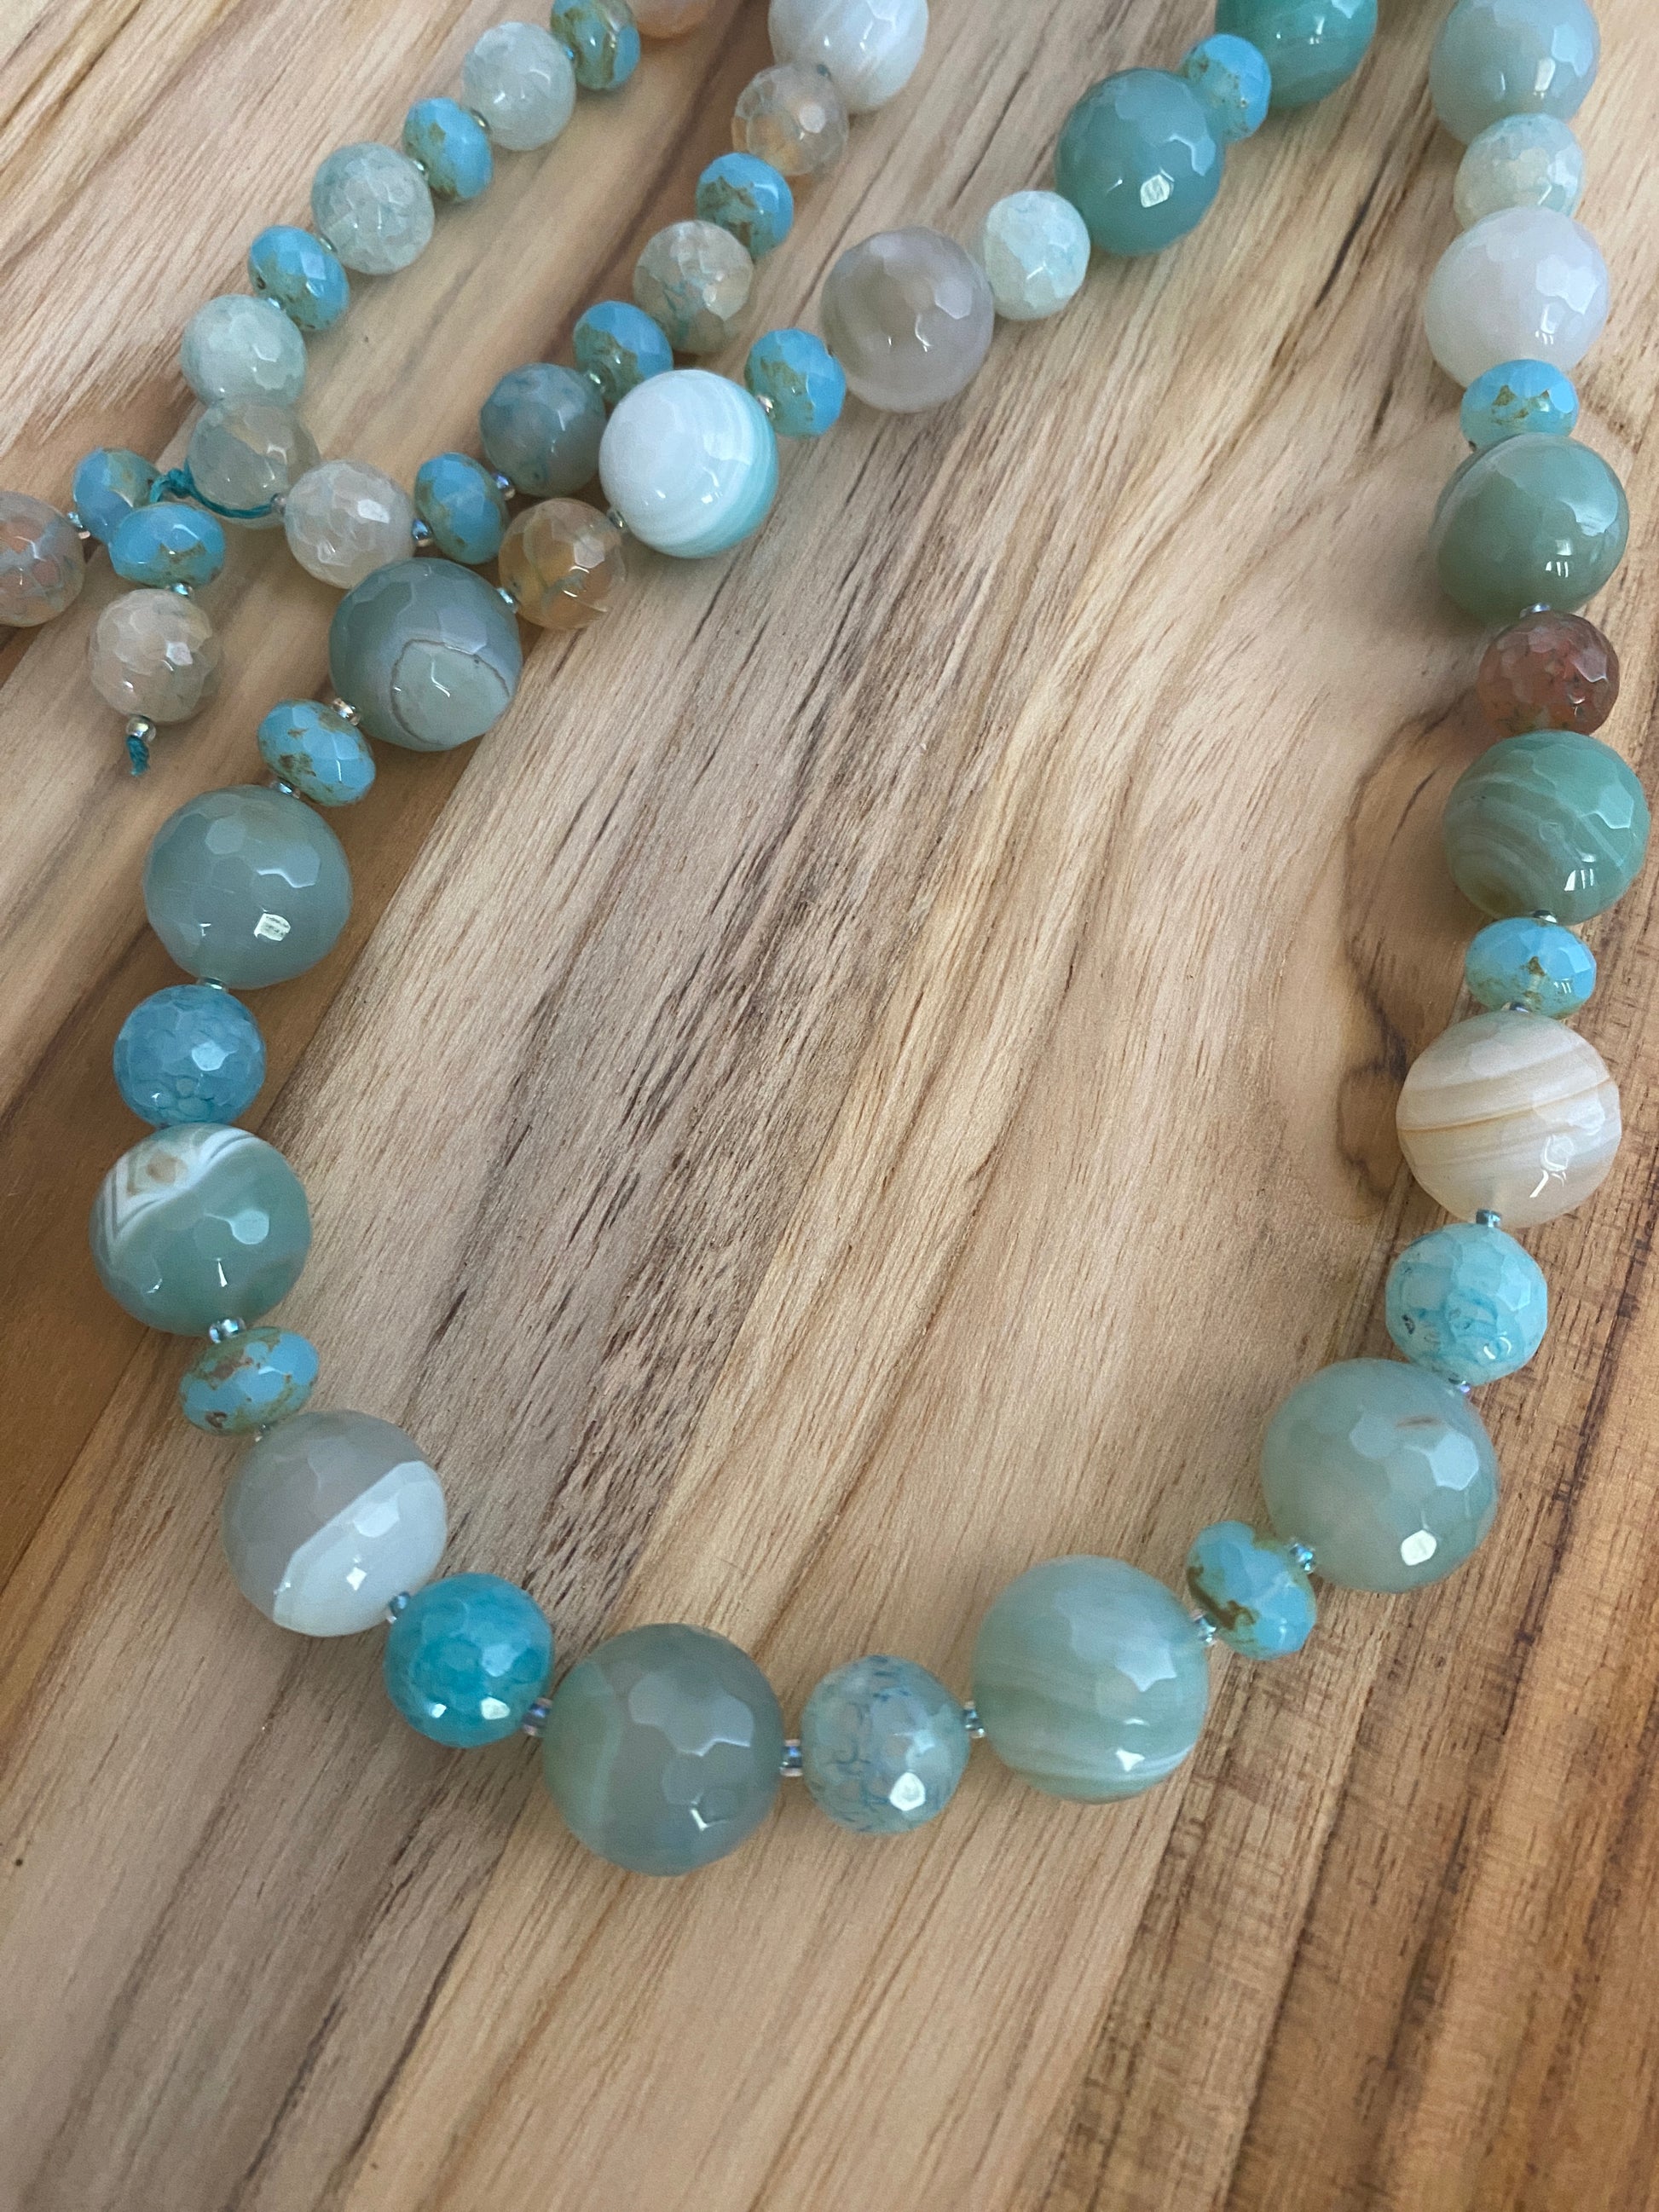 29" Long Aqua Blue Agate Beaded Necklace with Glass Beads - My Urban Gems